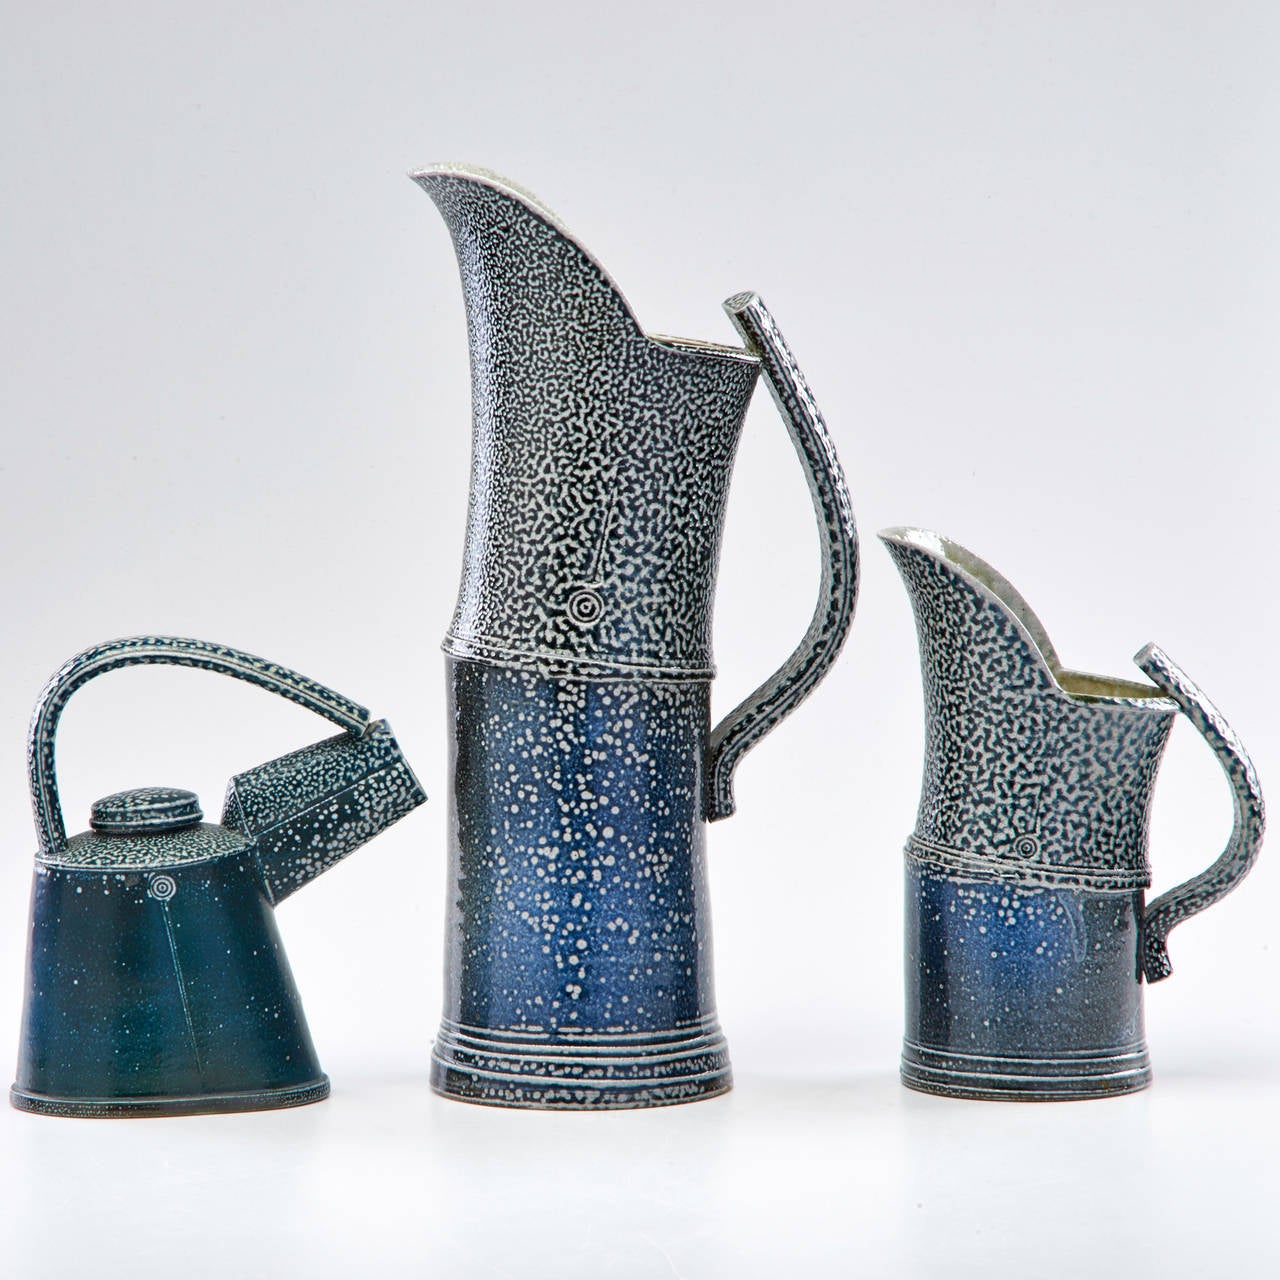 Two salt glazed pitchers and teapot with applied handles and incised decoration, Wales, second half of the 20th century, tallest 15".

Missing lid to teapot.

Born 1942, Edgware, Middlesex. 

1958-1963 Harrow School of Art,